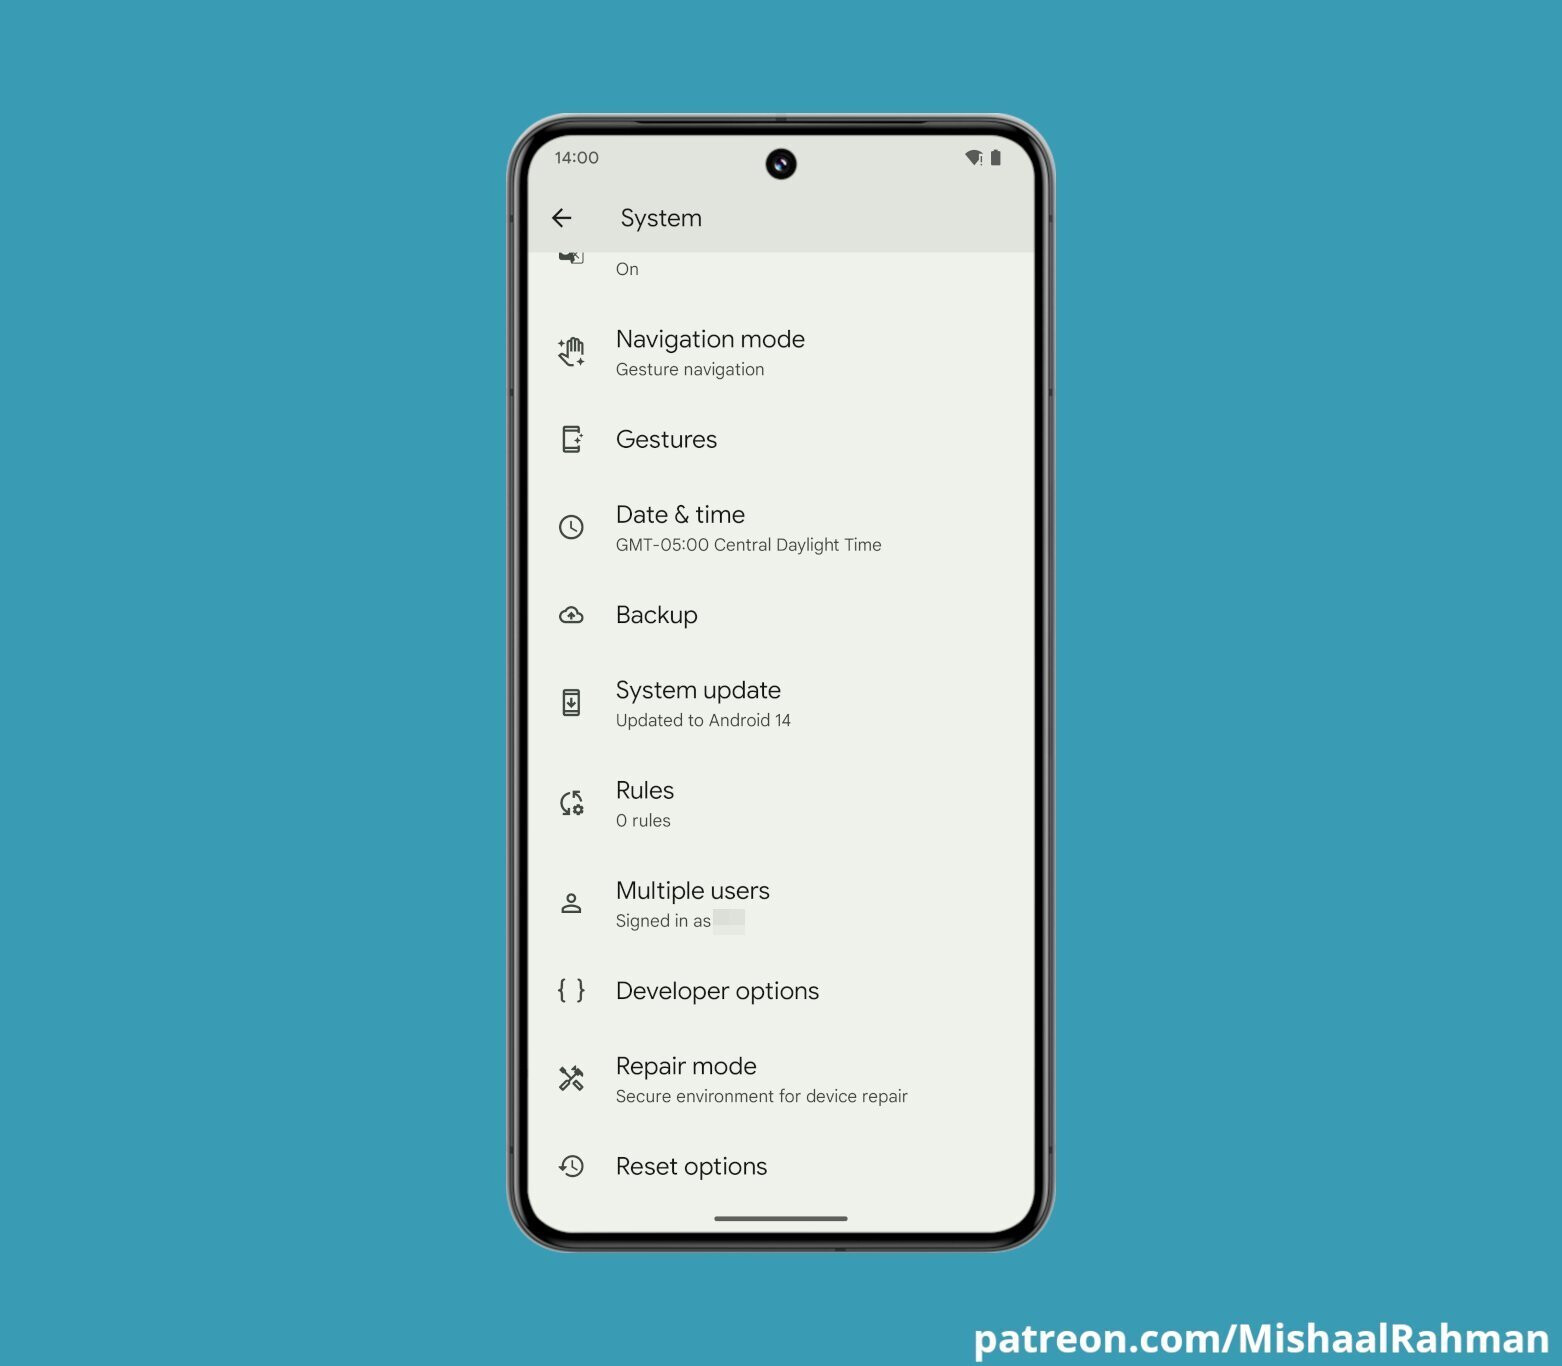 Image credit–Mishaal Rahman – Securing your data: Google is working on "repair mode" running Android 14 for hassle-free device repairs